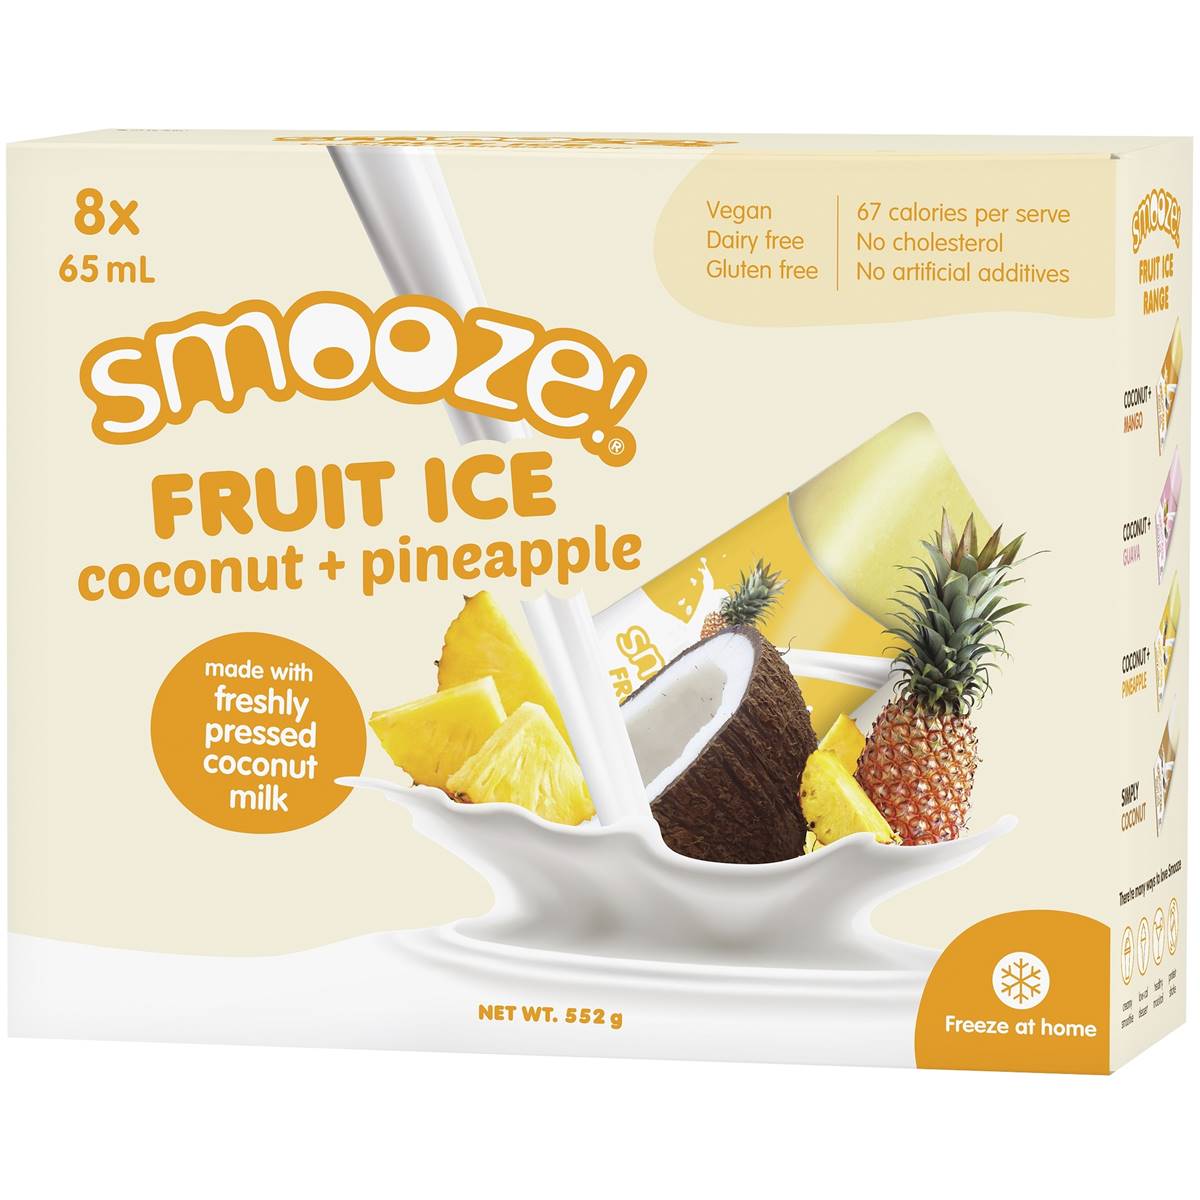 Calories in Smooze Pineapple & Coconut